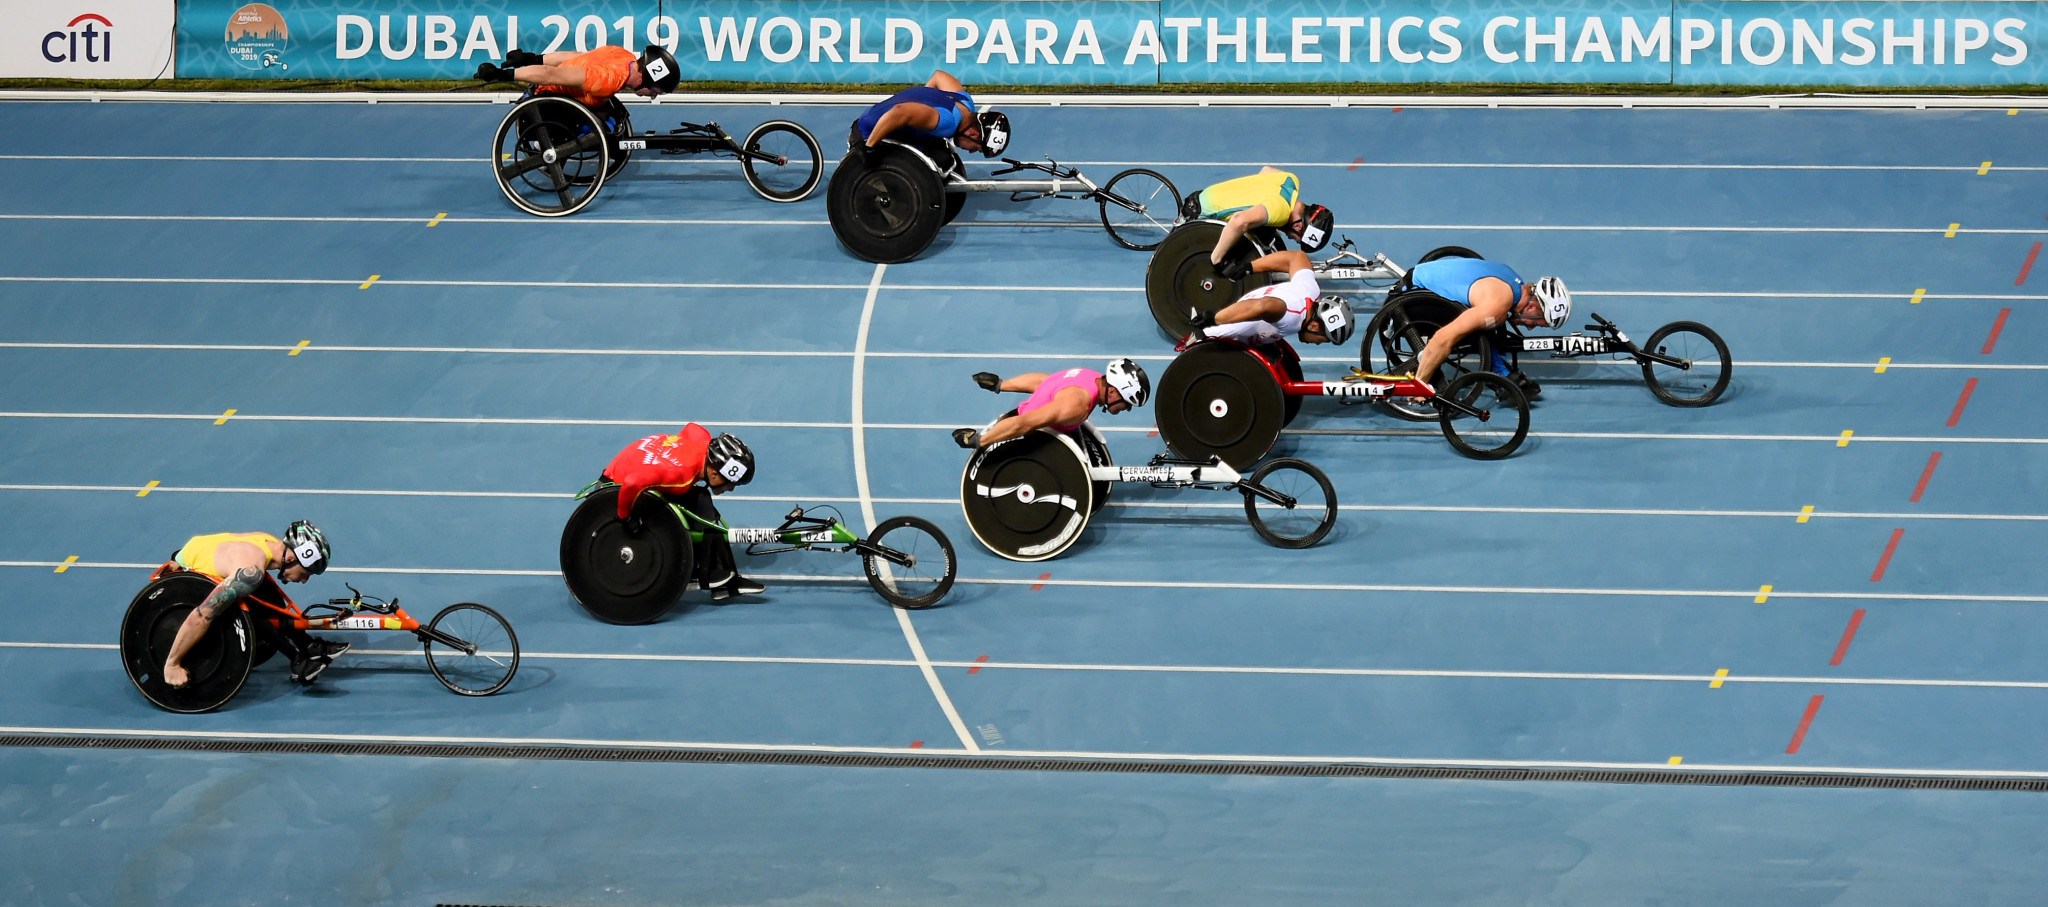 Dubai hosted the last edition of the Para Athletics World Championships in 2019 ©Getty Images